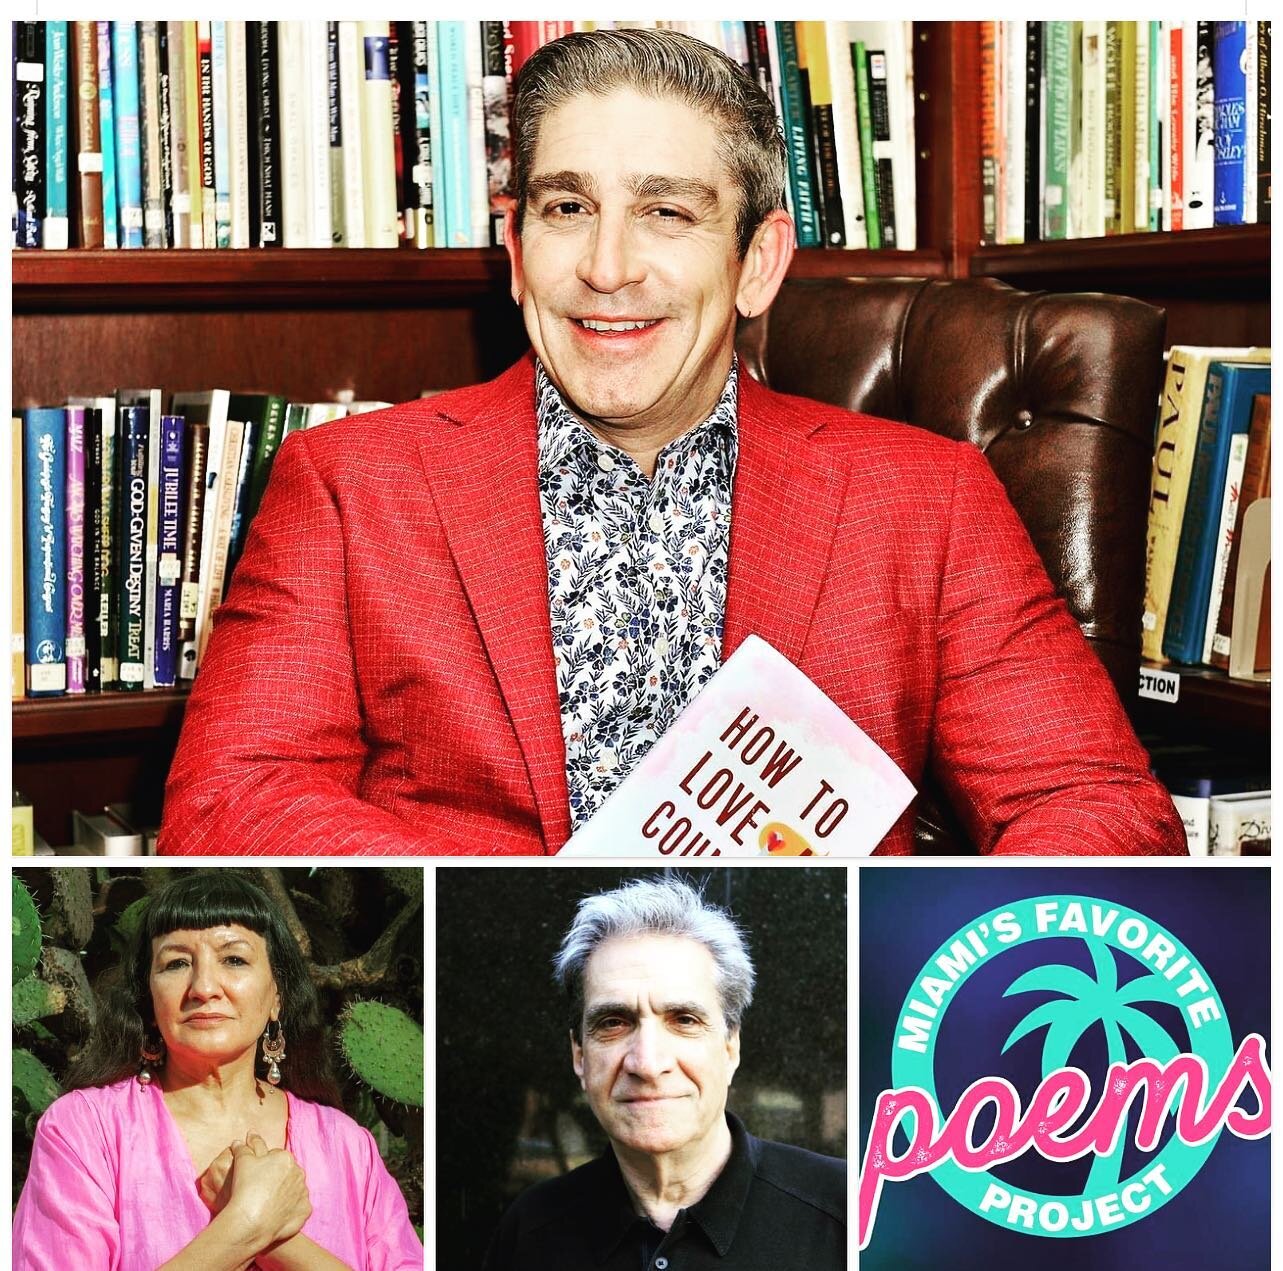 I am so so proud to be part of &ldquo;Miami&rsquo;s Favorite Poems&rdquo; project, a vision of our amazing poet Richard Blanco. It&rsquo;s happening this Saturday, the 19th, as part of the Miami Book Fair. So many of my heroes, so many poetry greats,